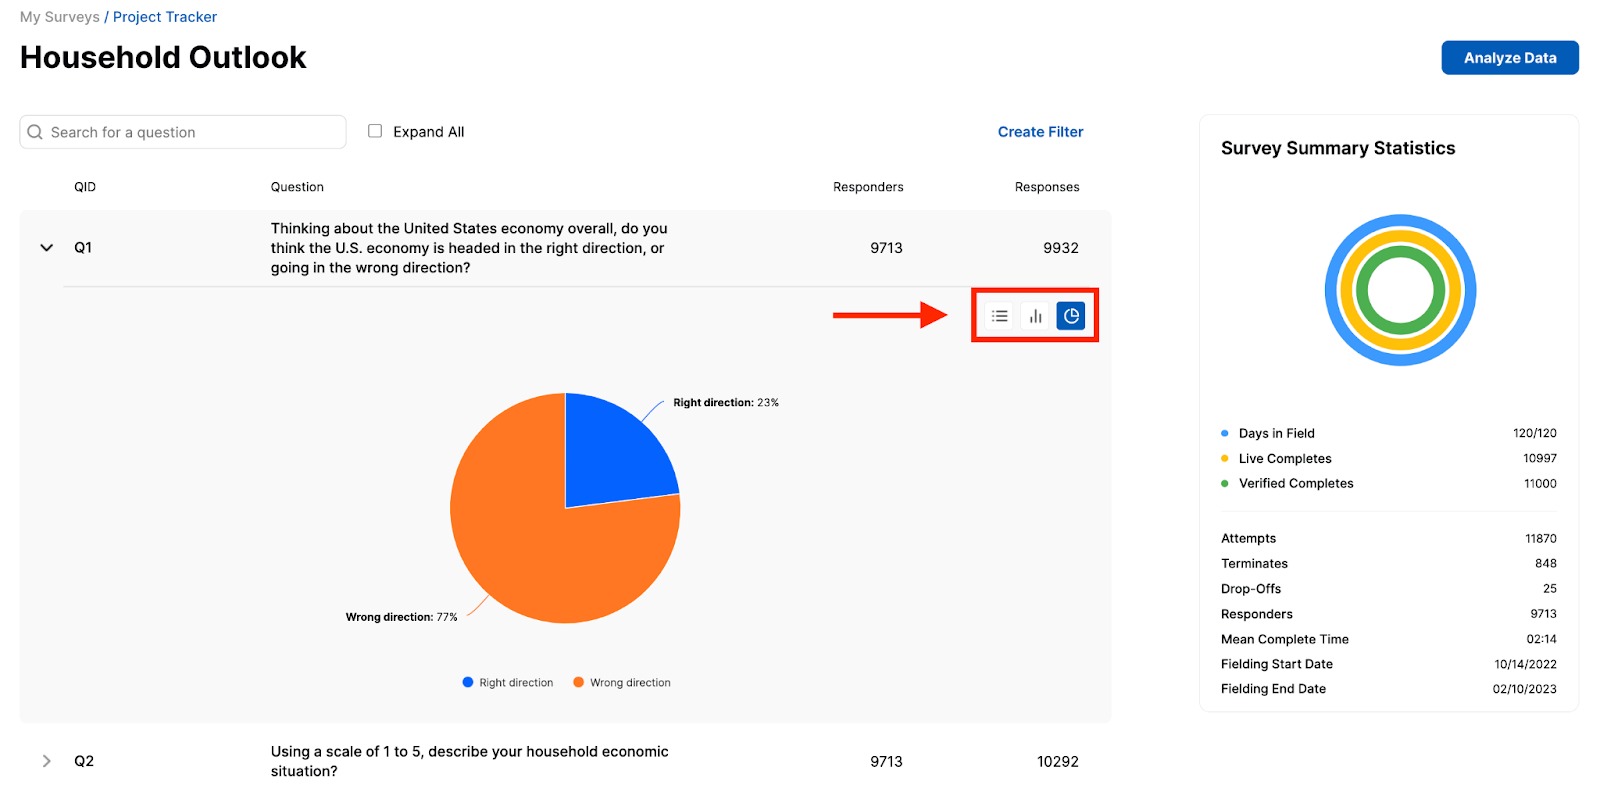 How to choose a chart type in the Project Tracker page of the Consumer Surveys app by Semrush.